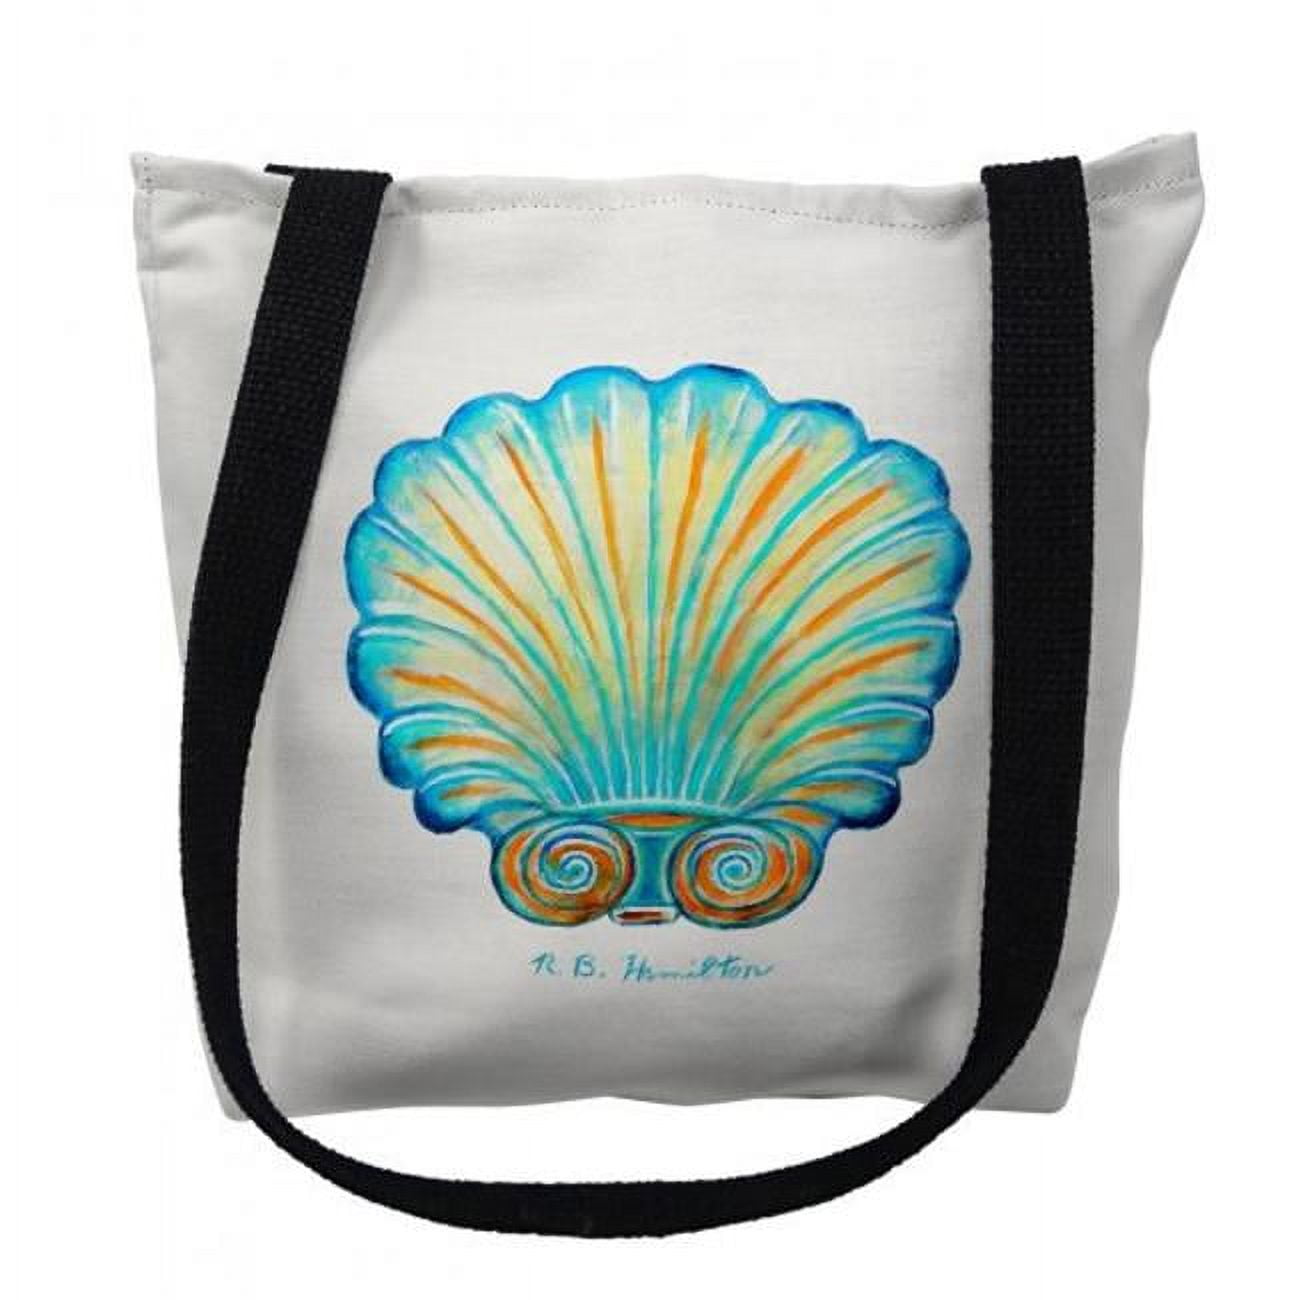 Ty113m 16 X 16 In. Rays Scallop Tote Bag - Medium